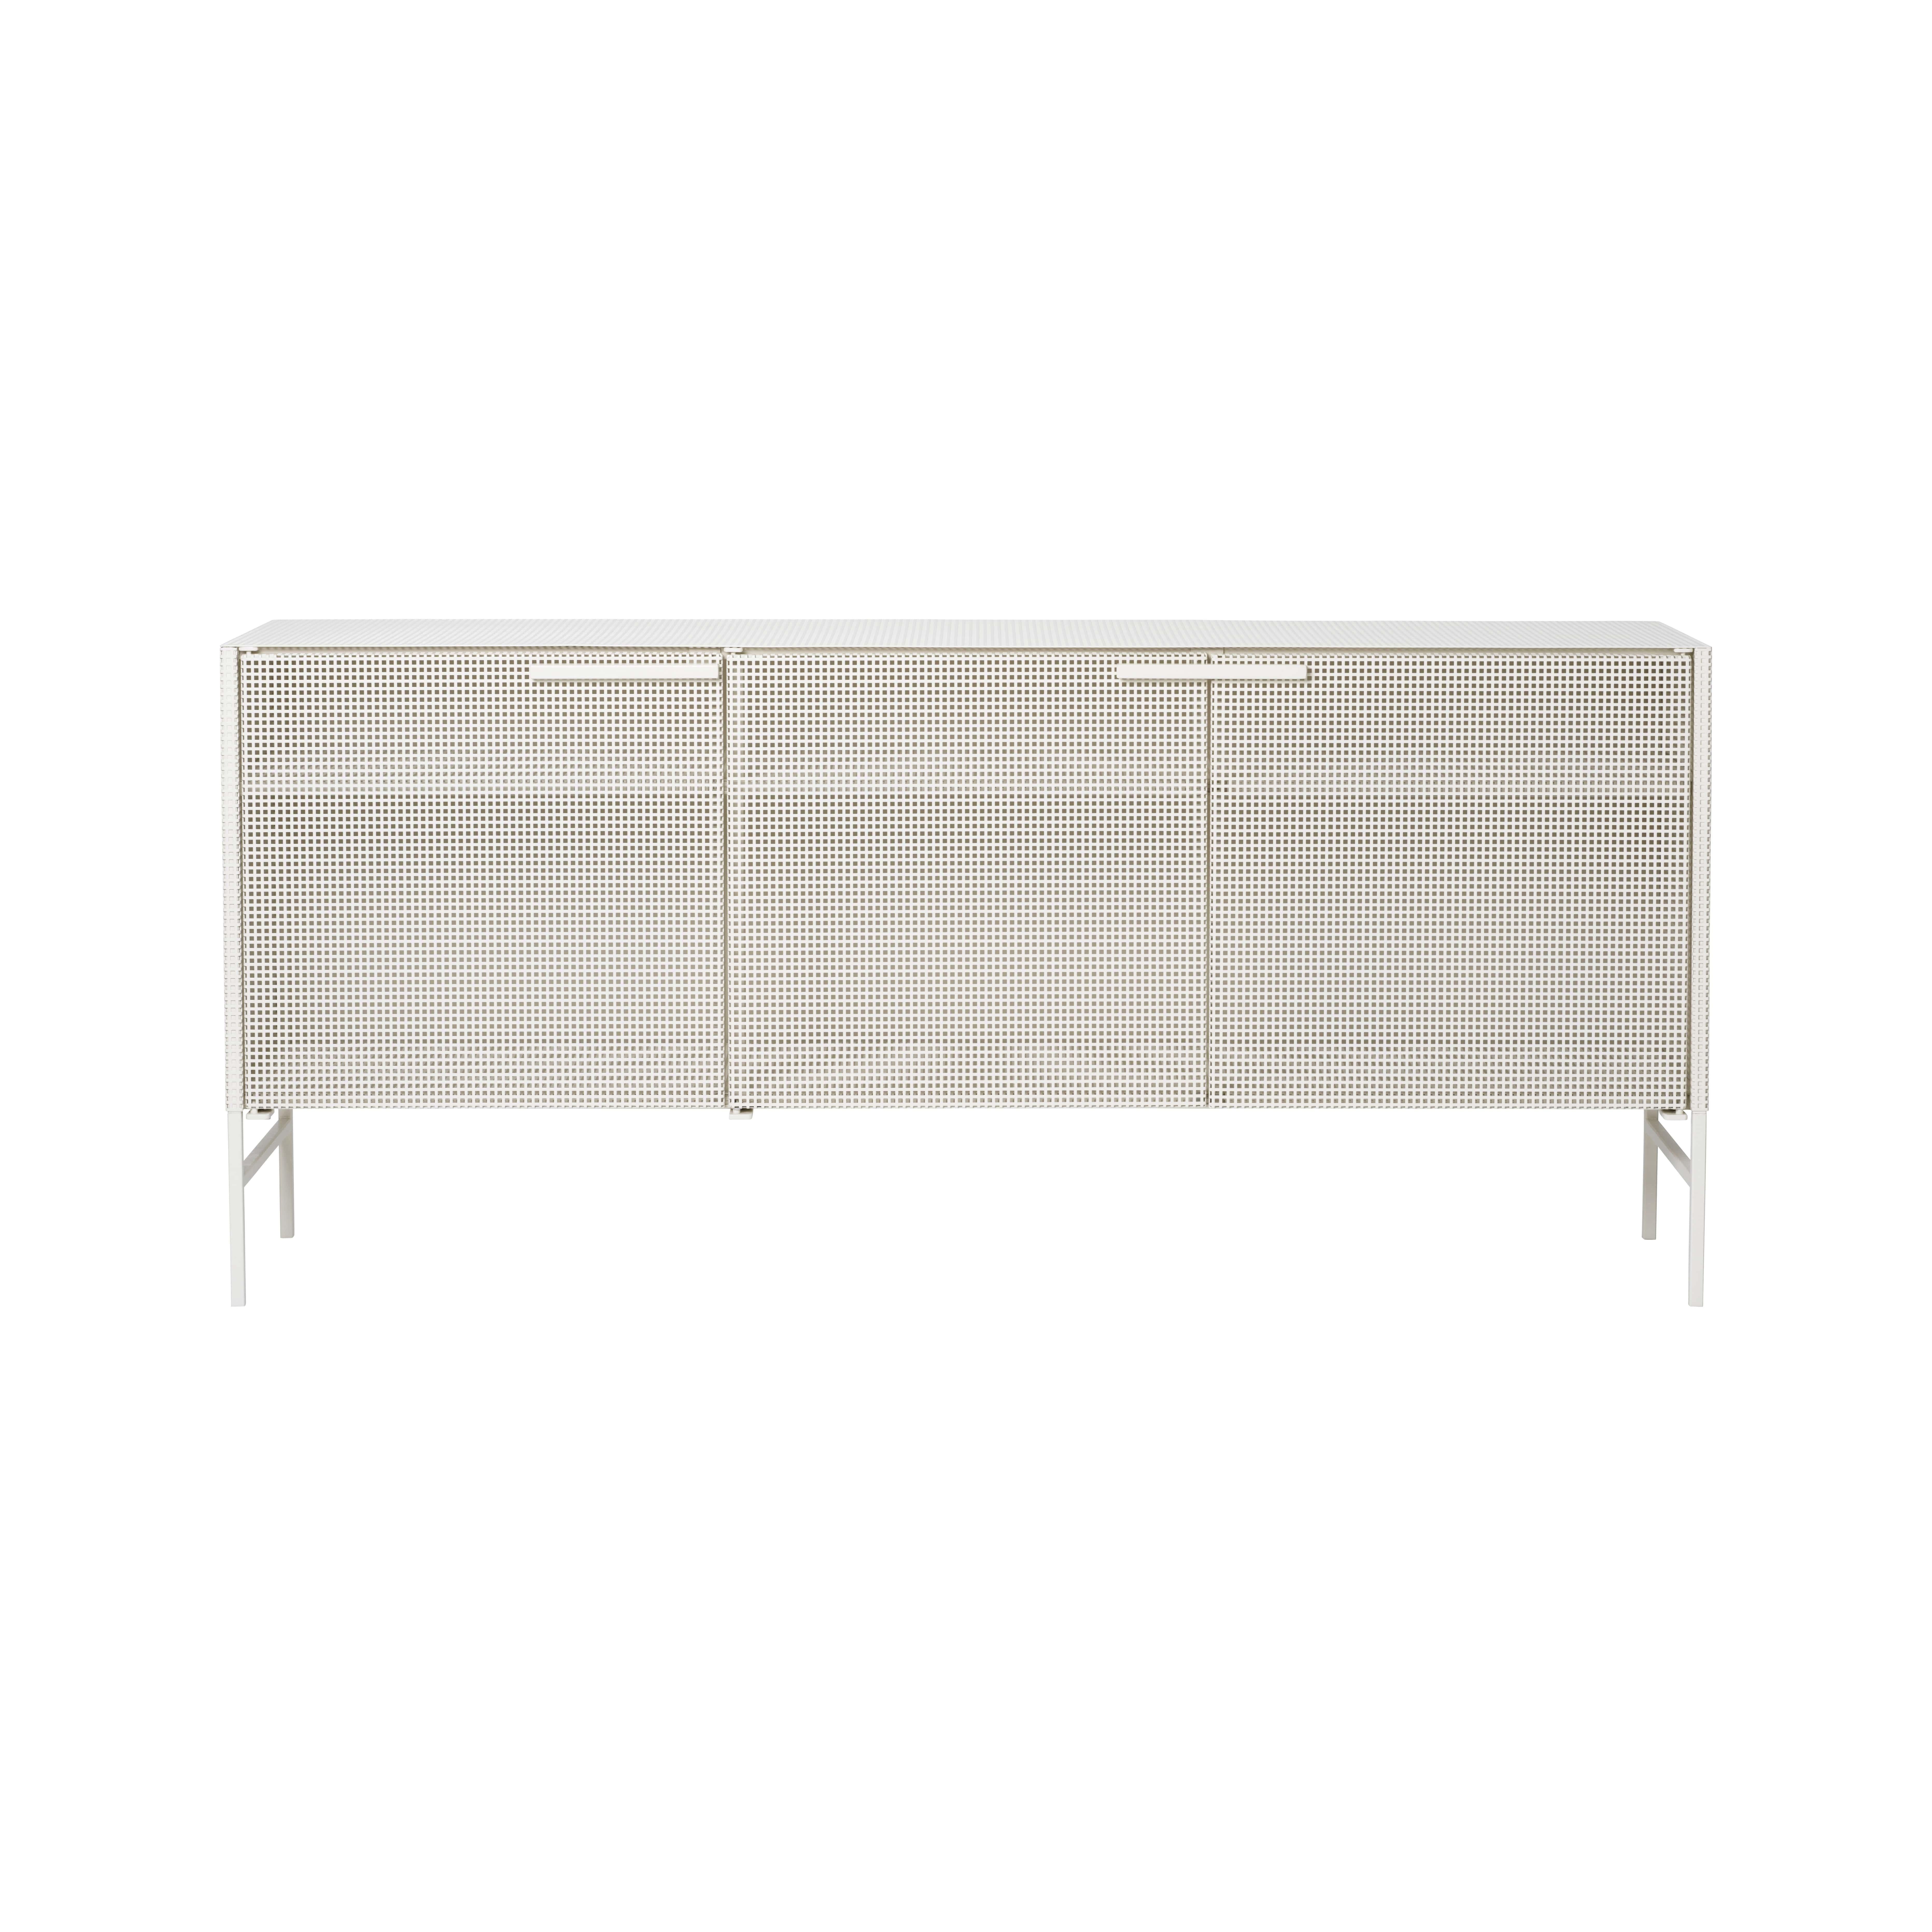 Grid sideboard by Kristina Dam Studio
Materials: Beige outdoor powder-coated steel
Dimensions: 160 x 72 x 36 cm


Kristina Dam graduated from The Royal Danish School of Fine Arts, Architecture and Design in Copenhagen. In her designs you will